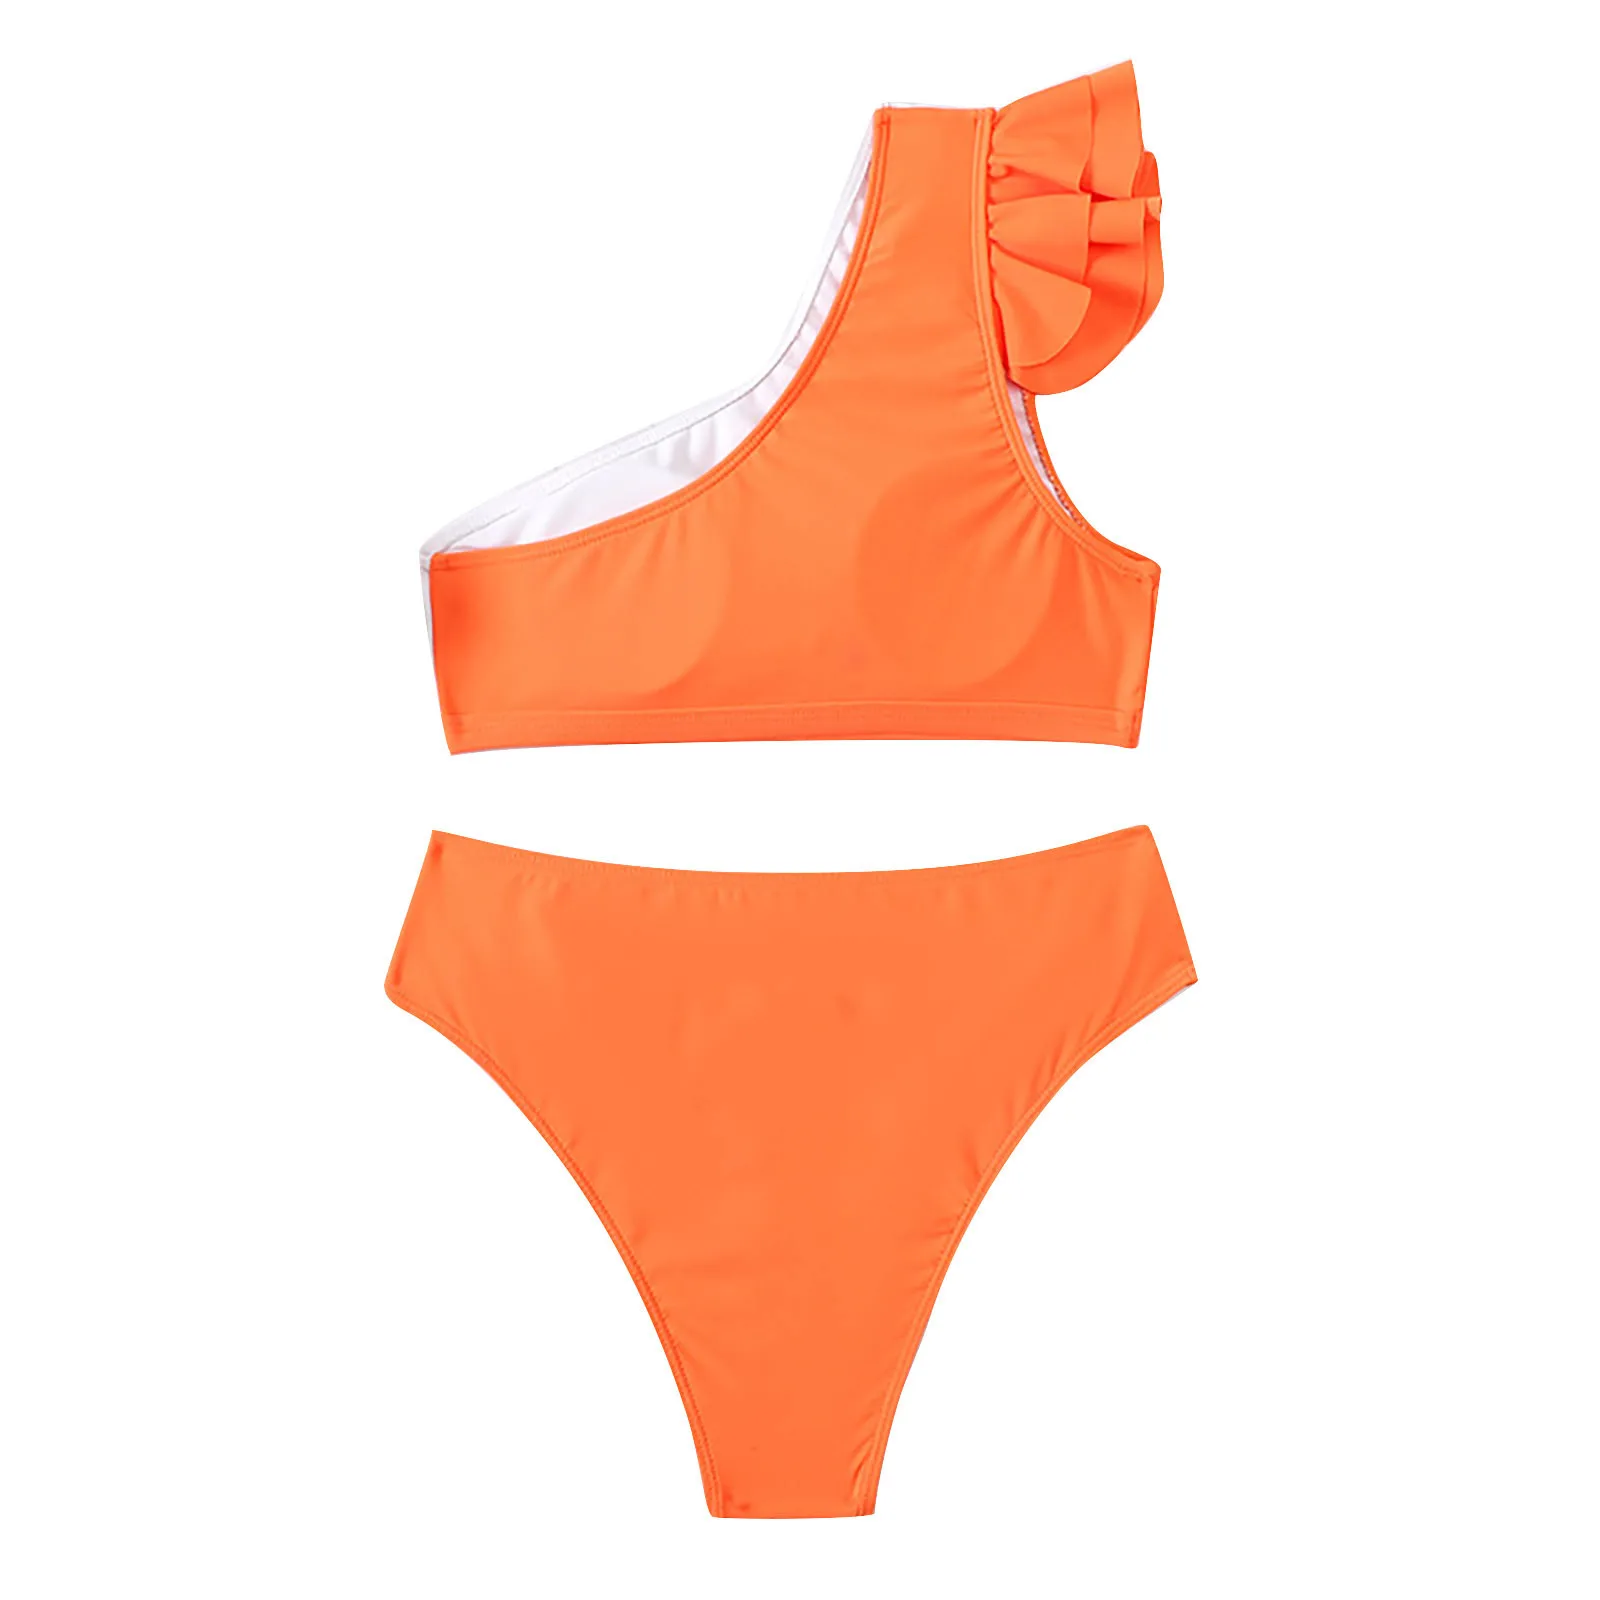 bathing suits Women High Waist Colorful Split One-shoulder Bikini With Chest Pad Without Steel Bra Swimsuit 2022 Sexy Women High Waist Bikini bathing suits